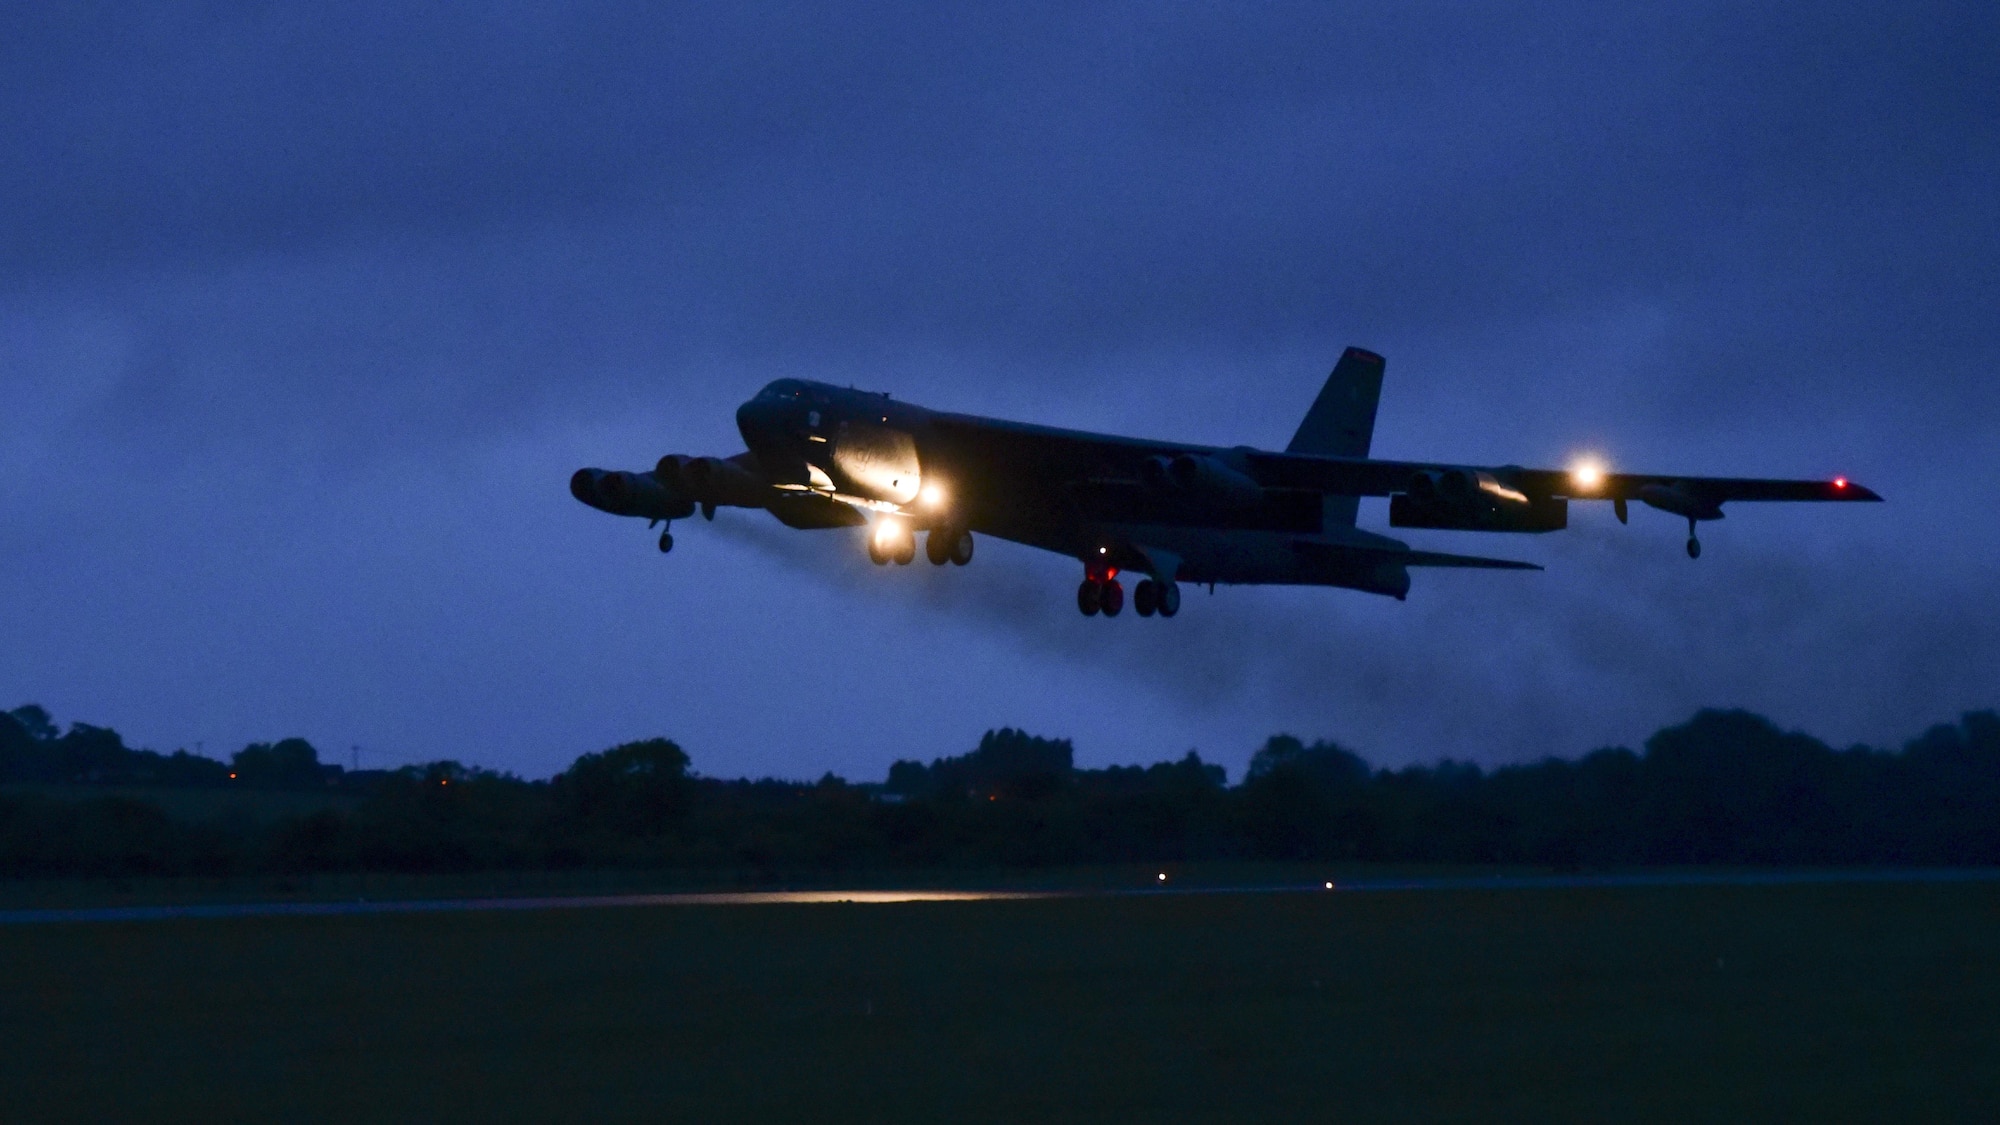 A B-52H Stratofortress from Barksdale Air Force Base, La., lifts off the runway at RAF Fairford, U.K., June 6, 2017. Crew members aboard B-52s will participate in BALTOPS, an annual, multinational, maritime-focused exercise involving NATO allies and partner nations. BALTOPS provides bomber crews with opportunities to integrate capabilities with regional partners and is part of the United States’ commitment to supporting global security. (U.S. Air Force photo by Airman 1st Class Randahl J. Jenson)